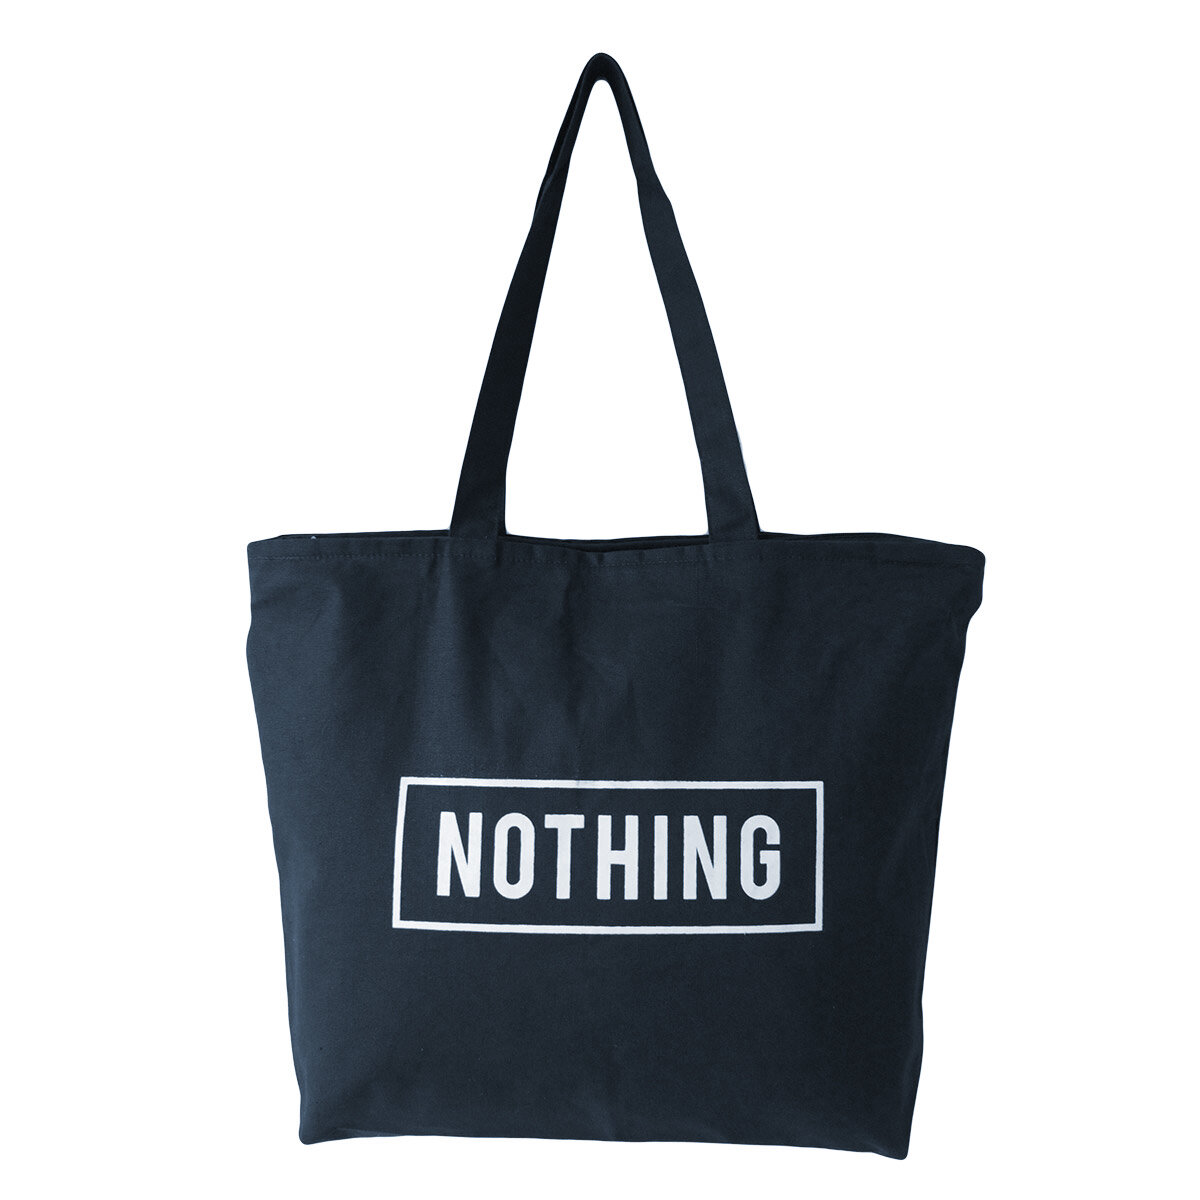 tany-Nothing-Tote-02-cdr.jpg